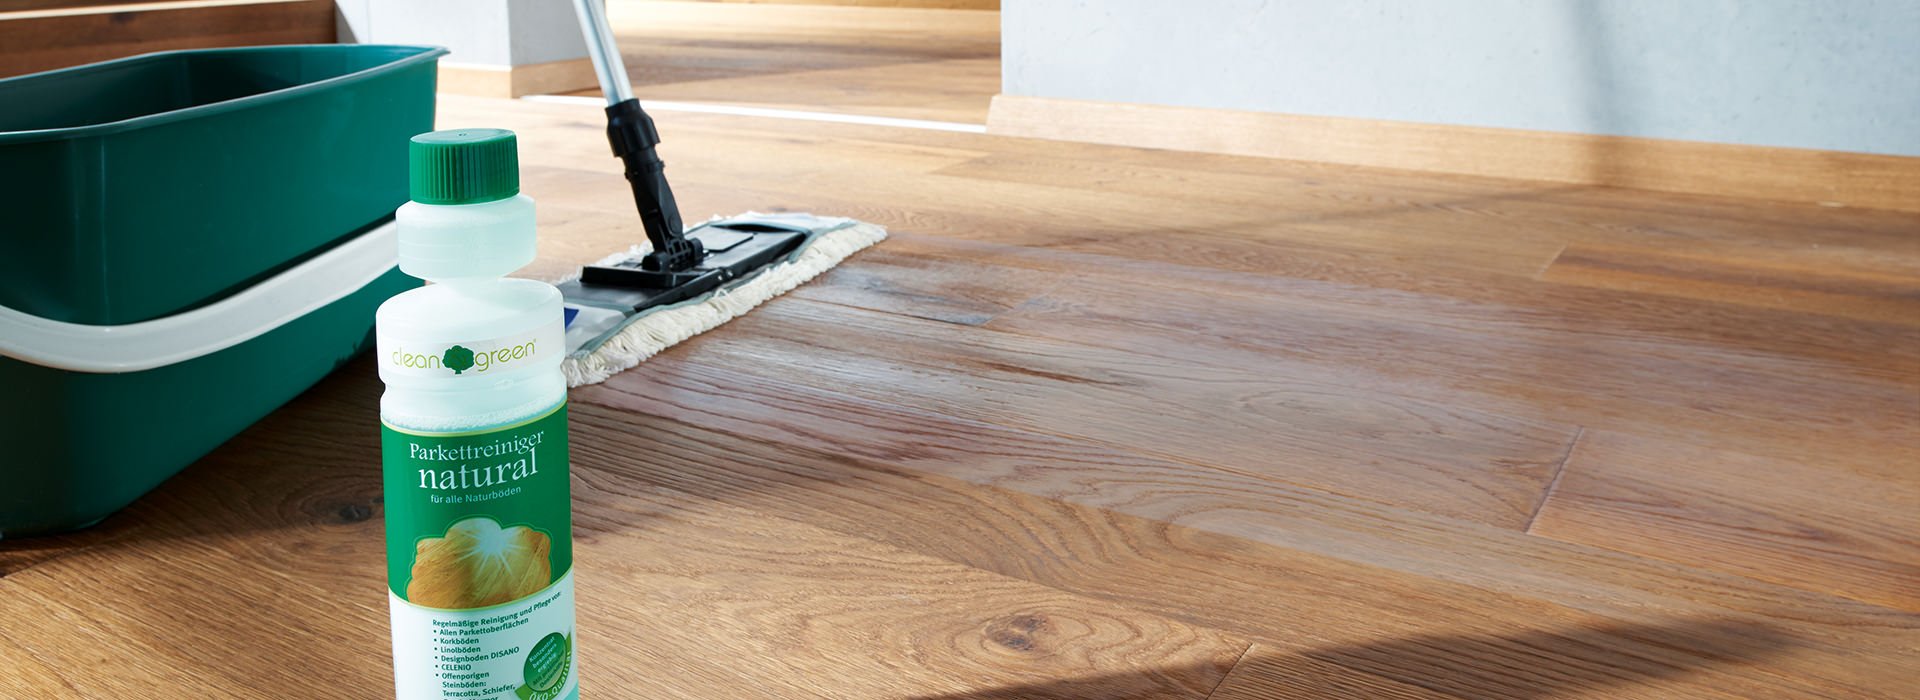 3 best tips for how to clean sticky floor